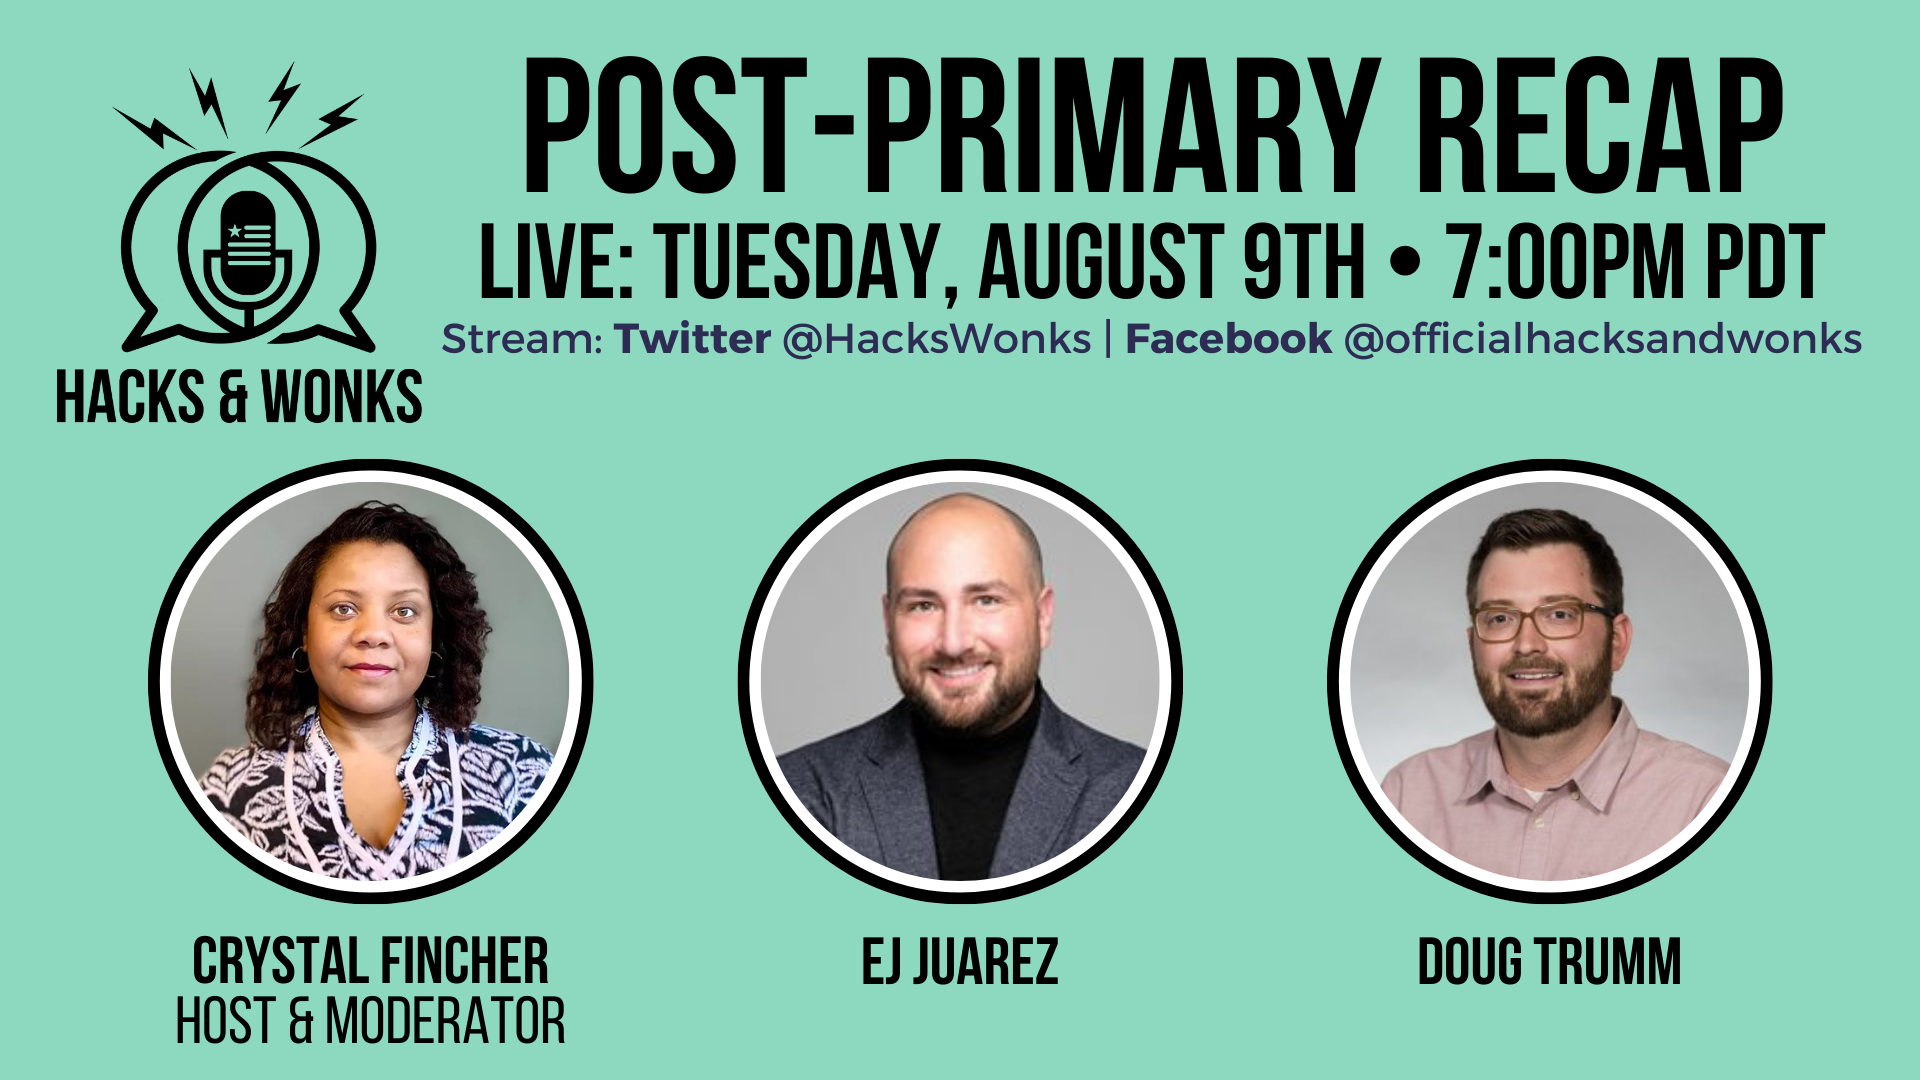 A graphic advertising the Hacks & Wonks Post-Primary 2022 Recap, featuring photos of Crystal Fincher, EJ Juárez, and Doug Trumm.